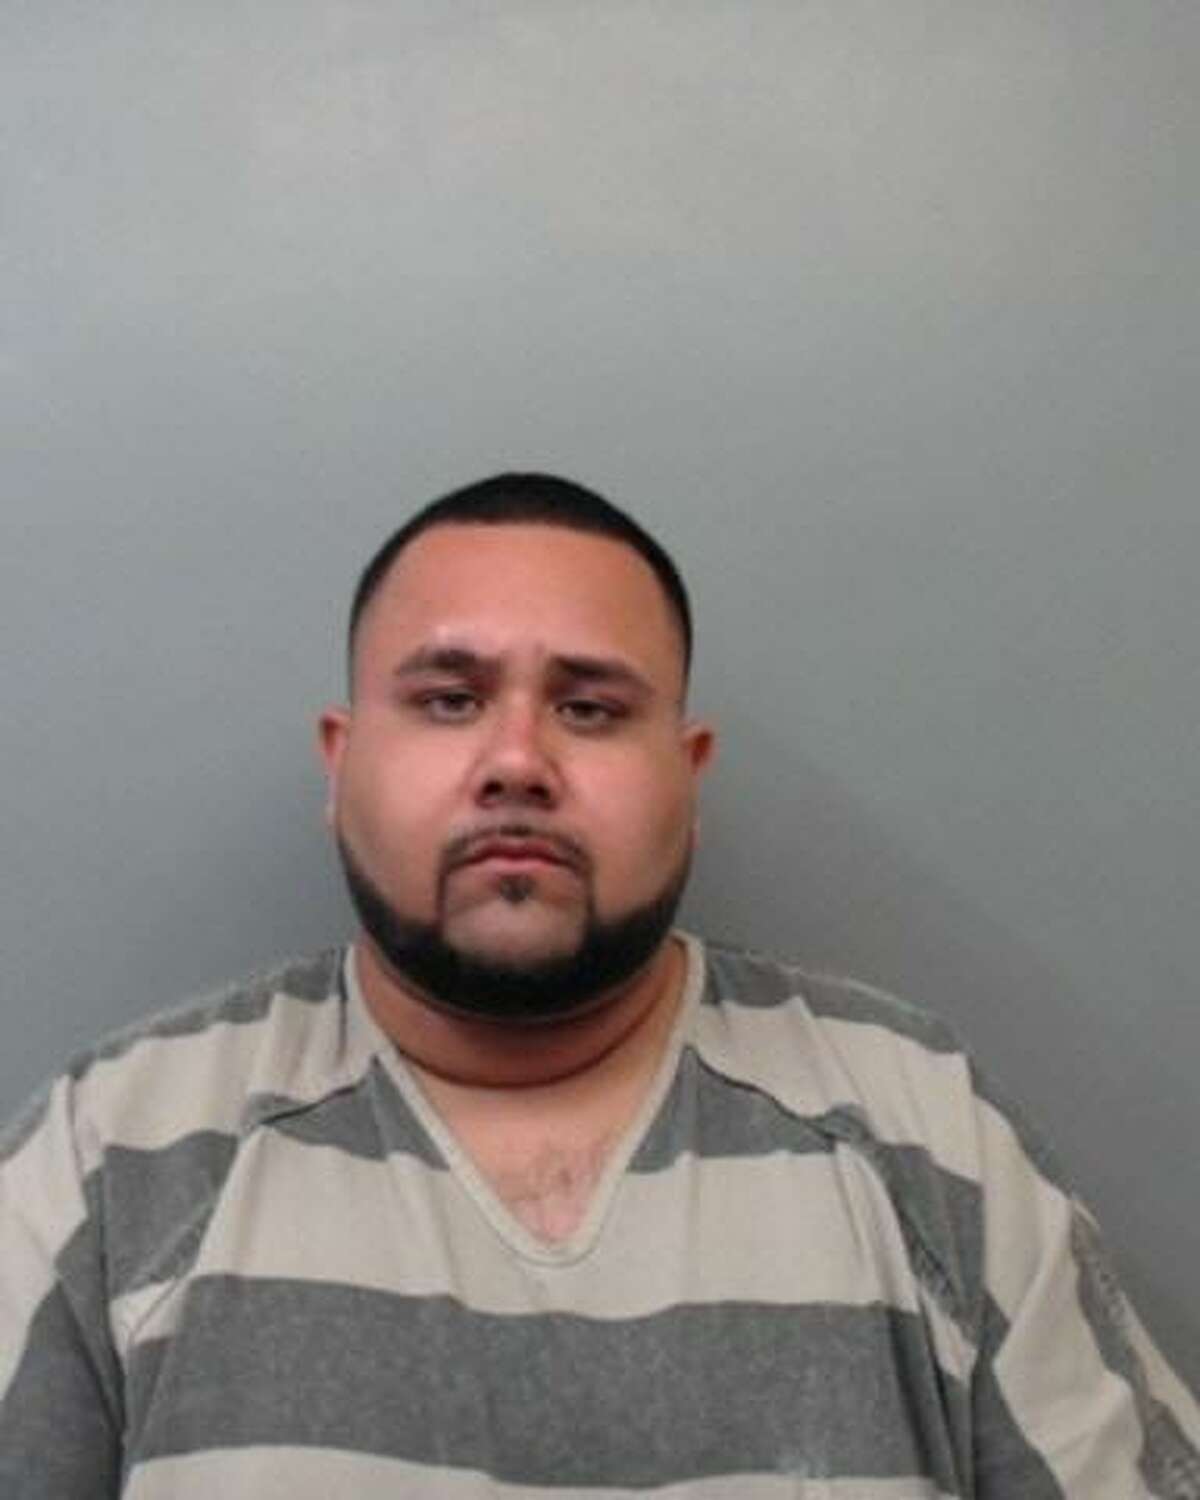 Eduardo Arrambide Jr., 27, was charged with two counts of endangerment of a child by criminal negligence.